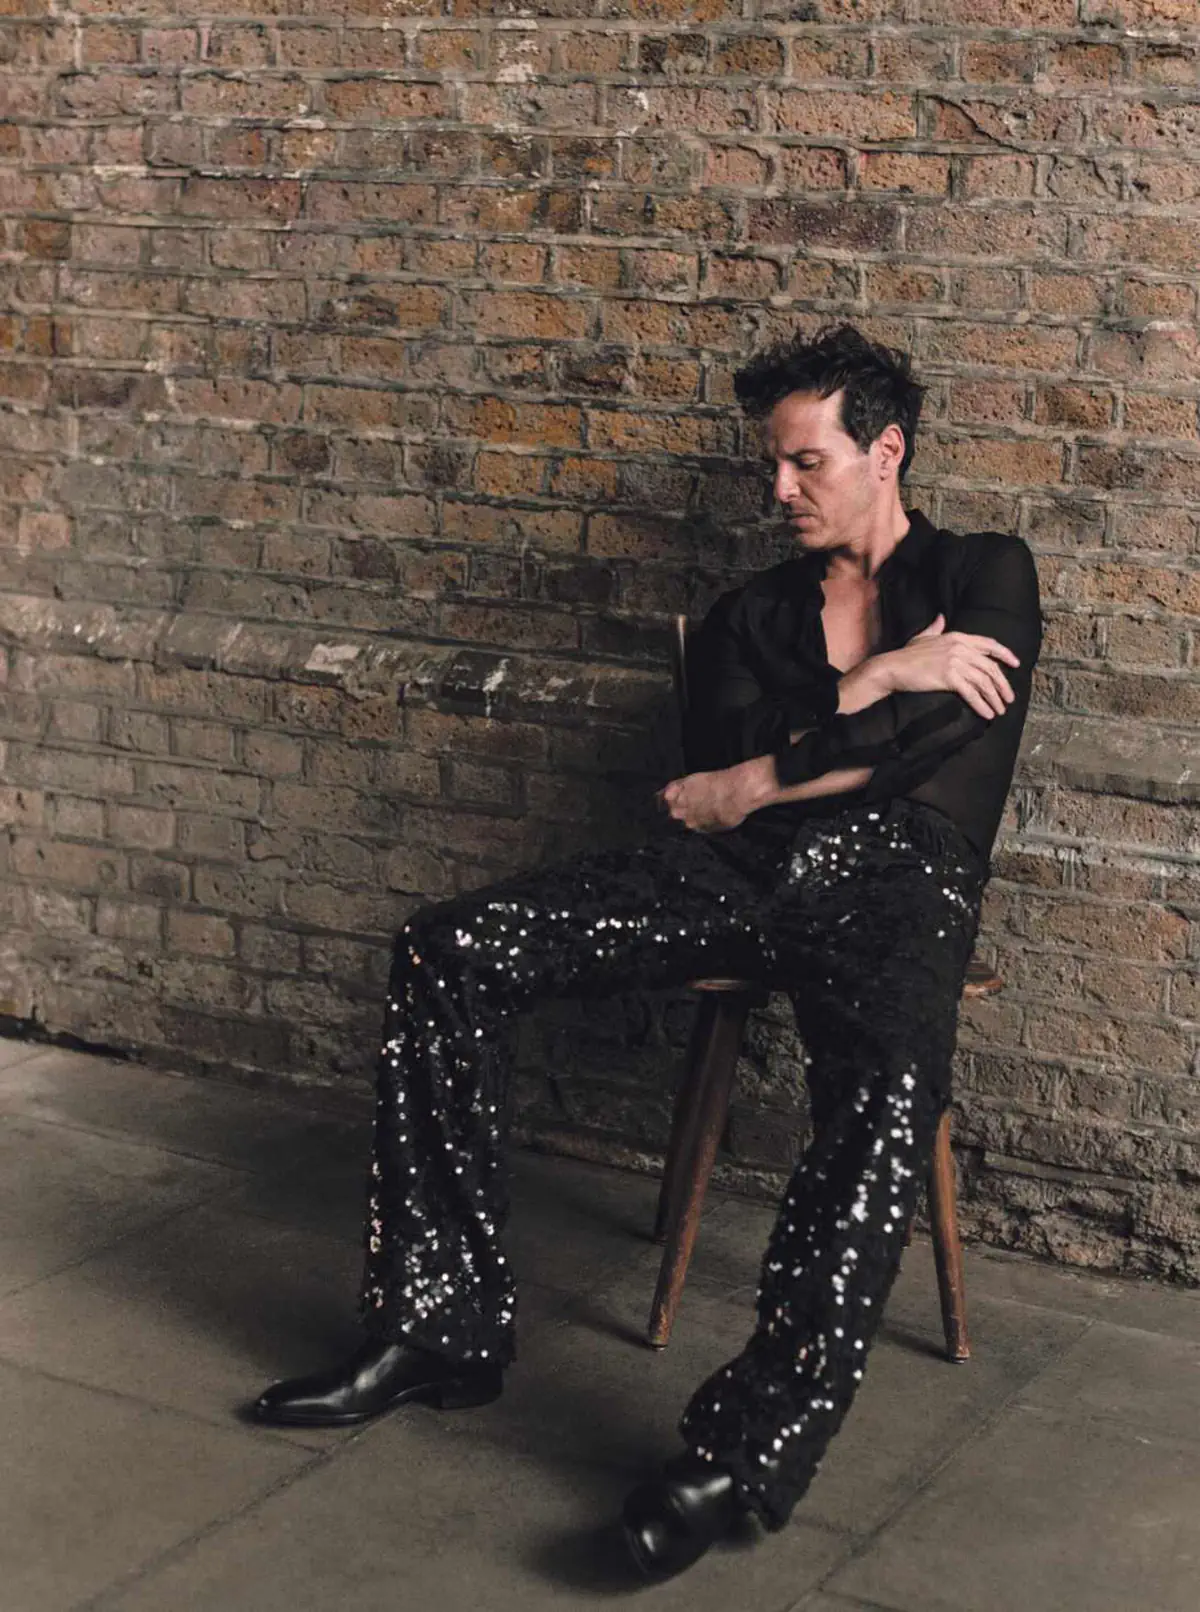 Andrew Scott covers The Sunday Times Style April 14th 2024 by Ward Ivan Rafik